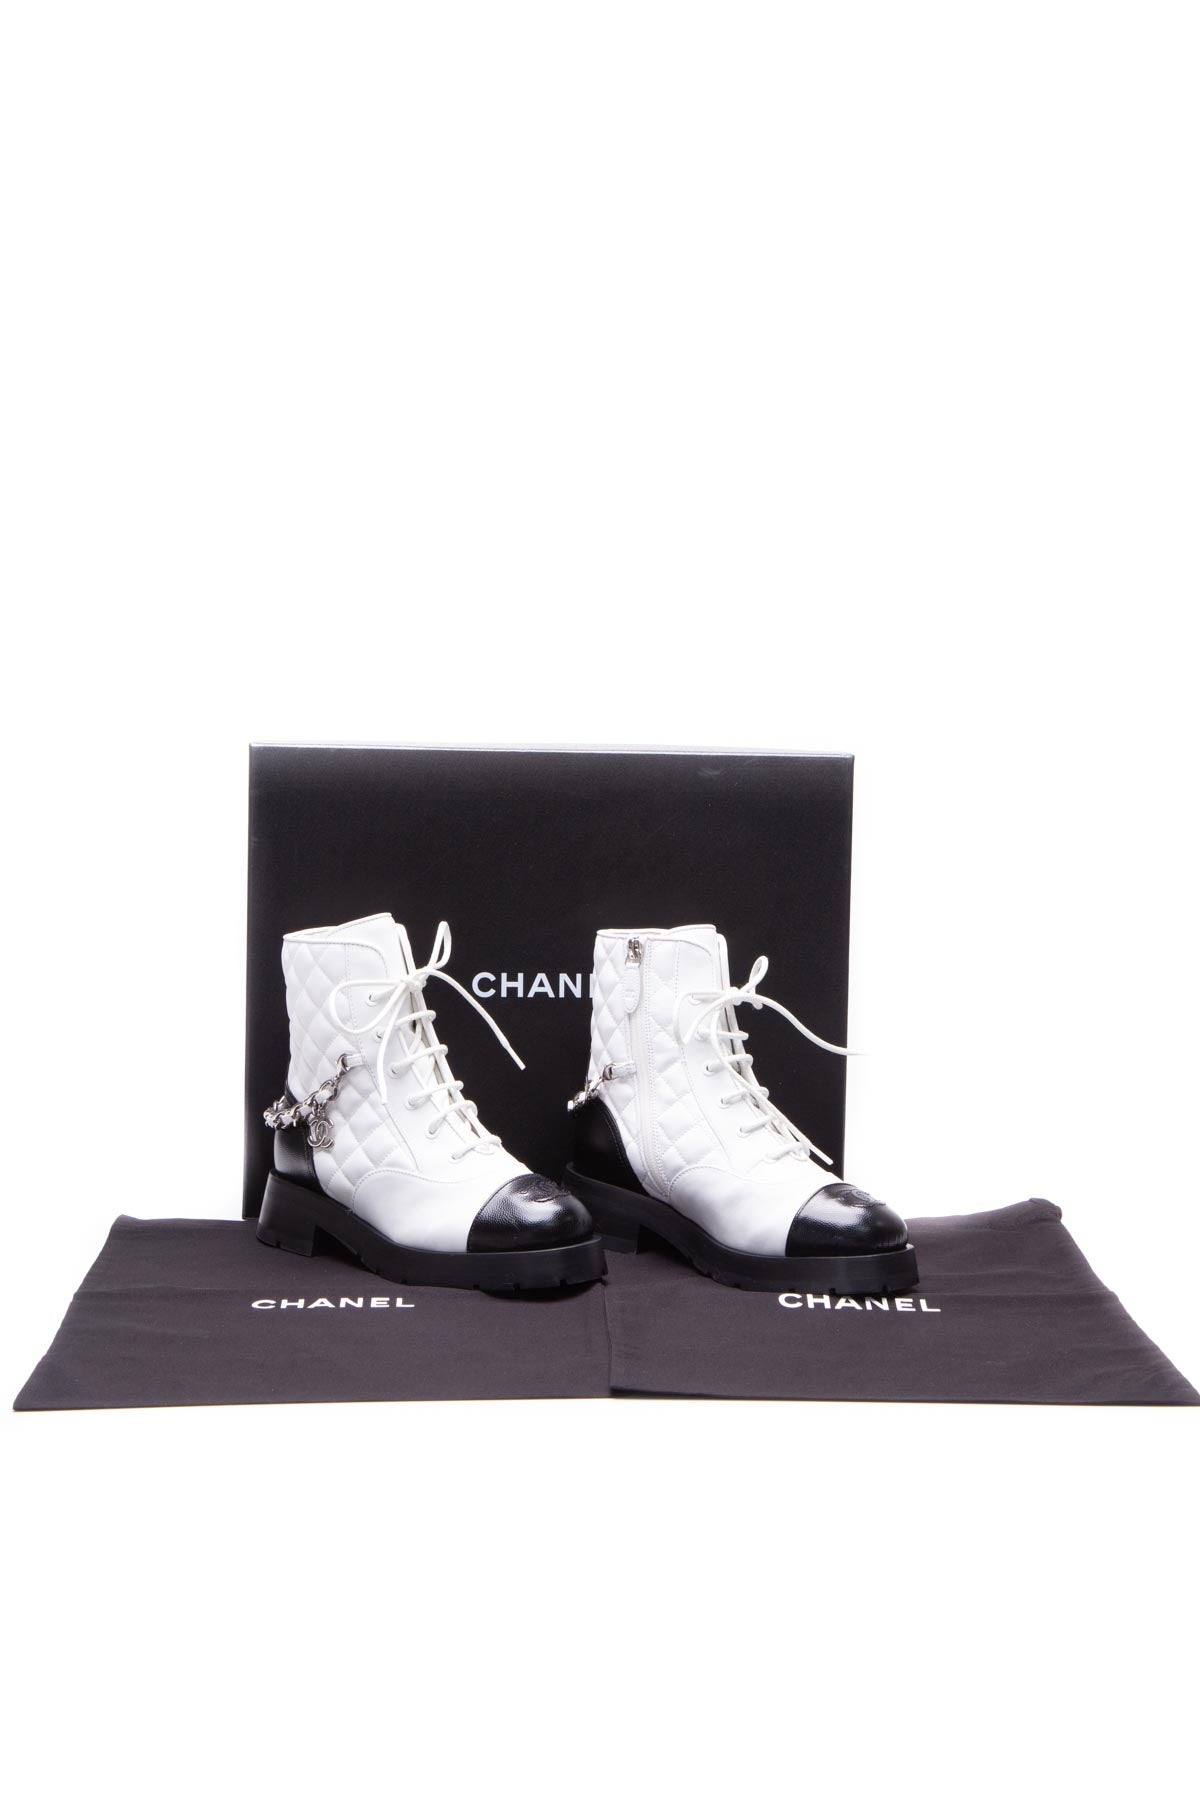 Chanel Chain Lace-Up Boots - Size 36.5 - Couture USA